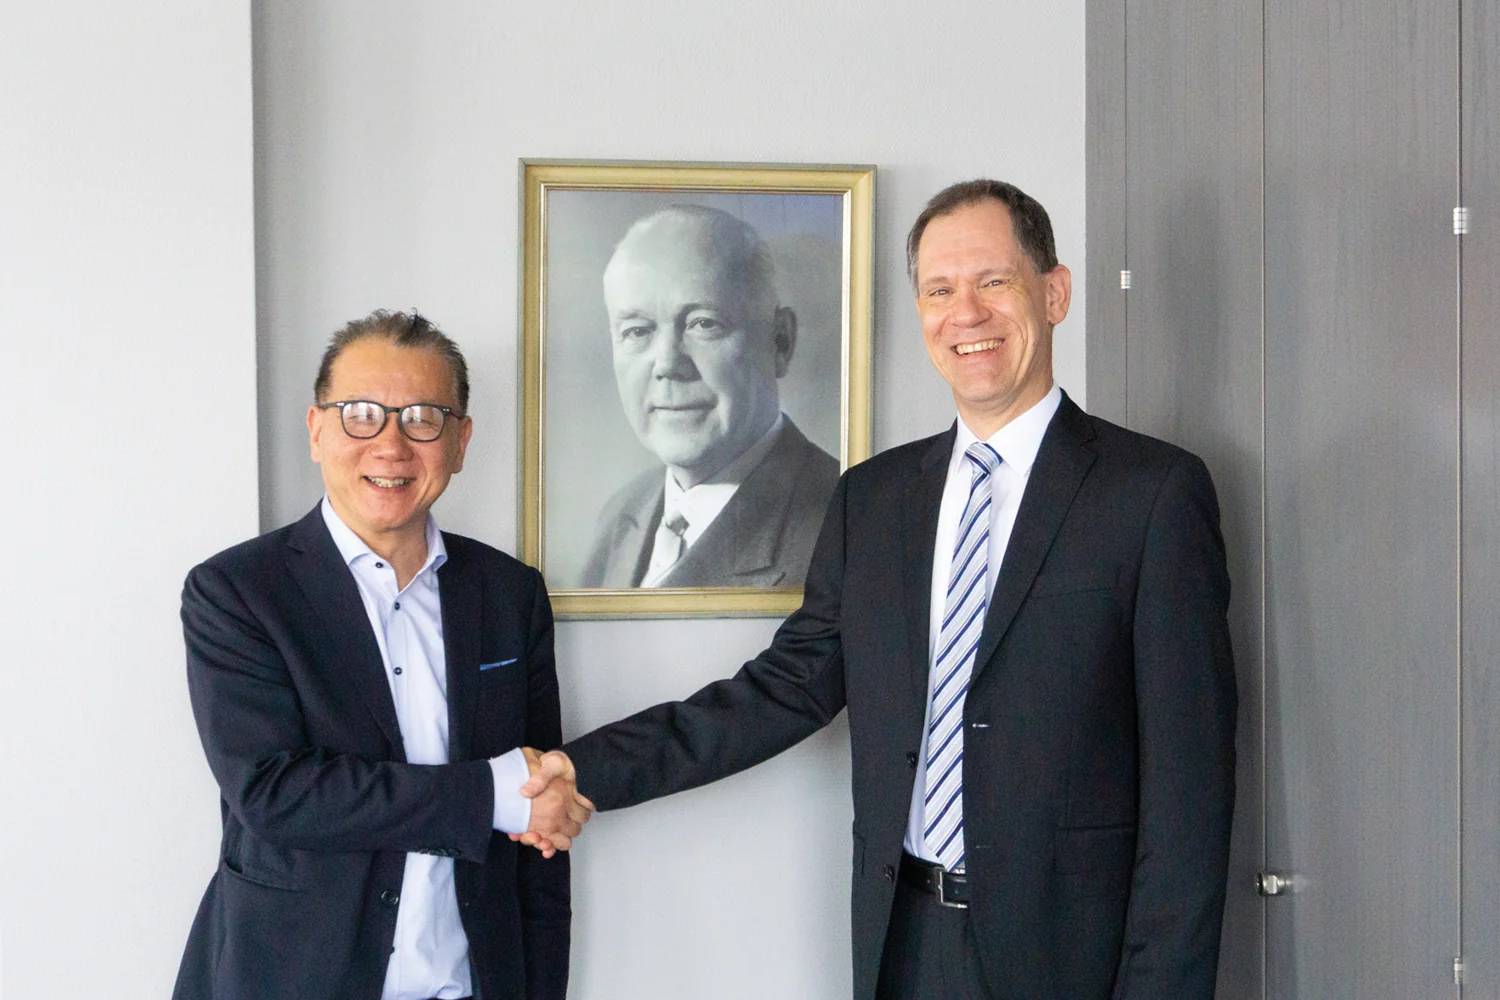 Eric Zhang, Founder & Managing Director of Biofiber Tech Sweden AB, and Volker Scheel, Managing Director of K.D. Feddersen Holding GmbH, are looking forward to the future cooperation.